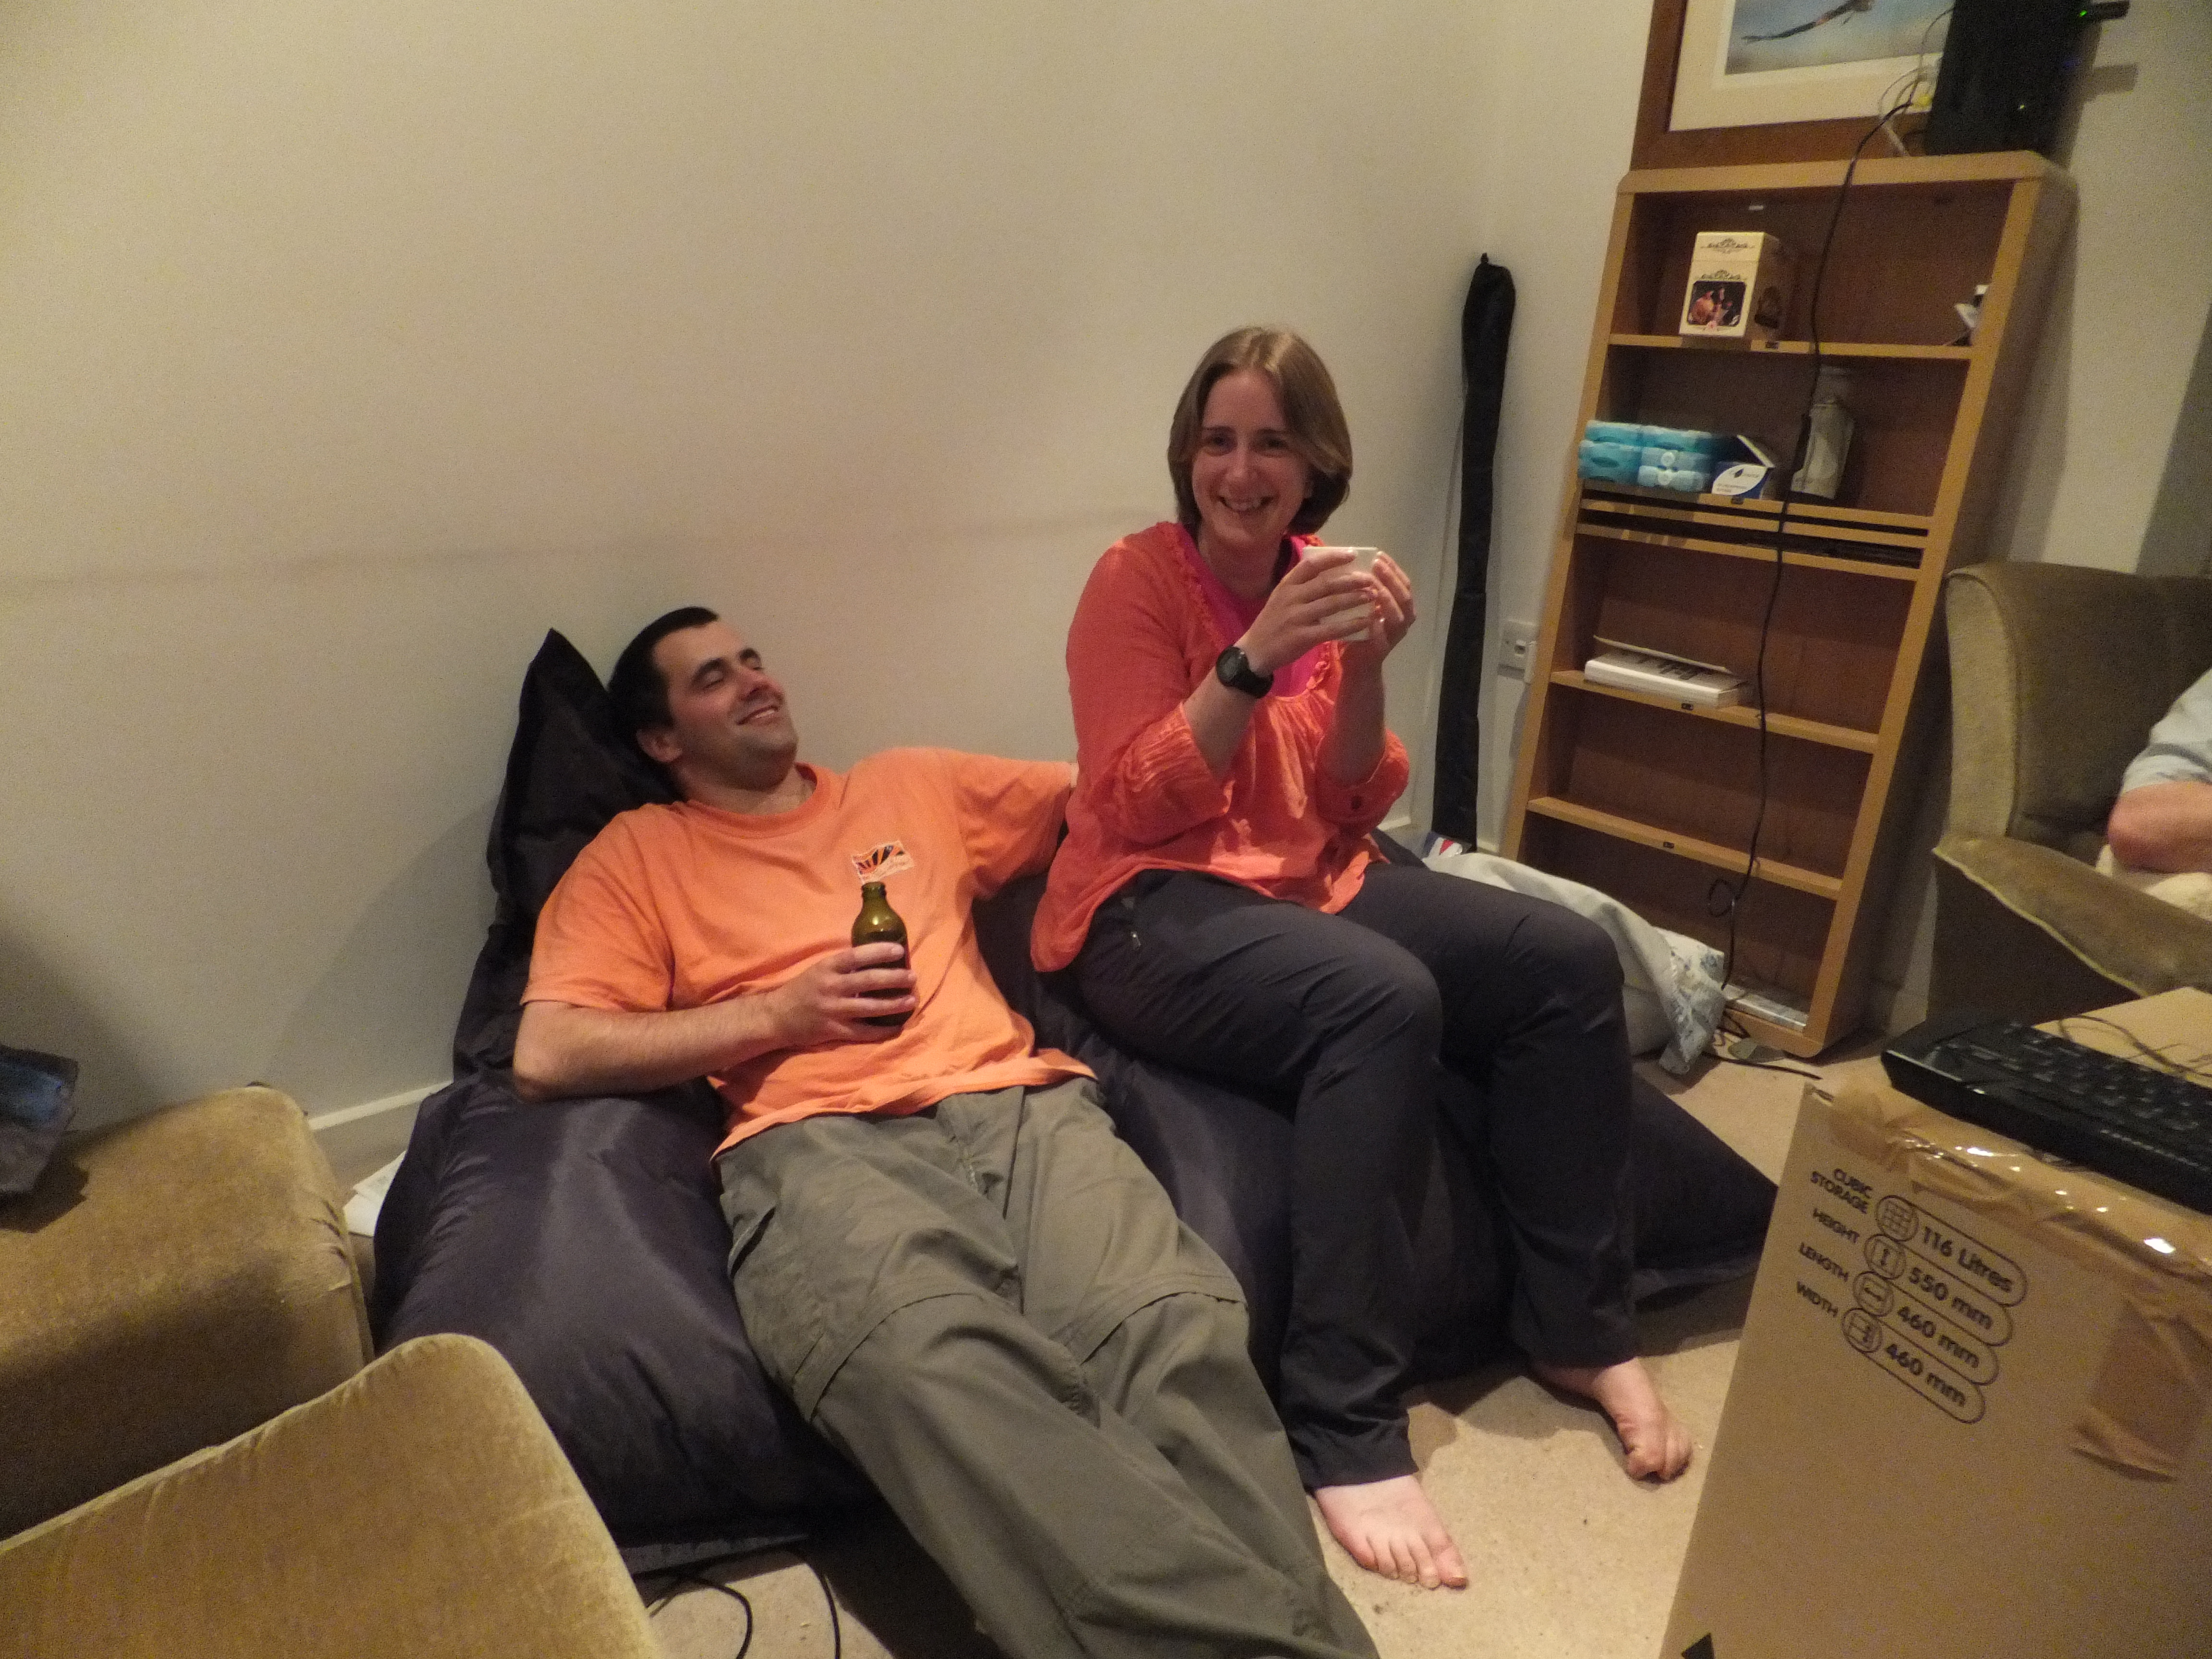 Matt and Susan on a bean bag as we rest at the end of the first day's moving.